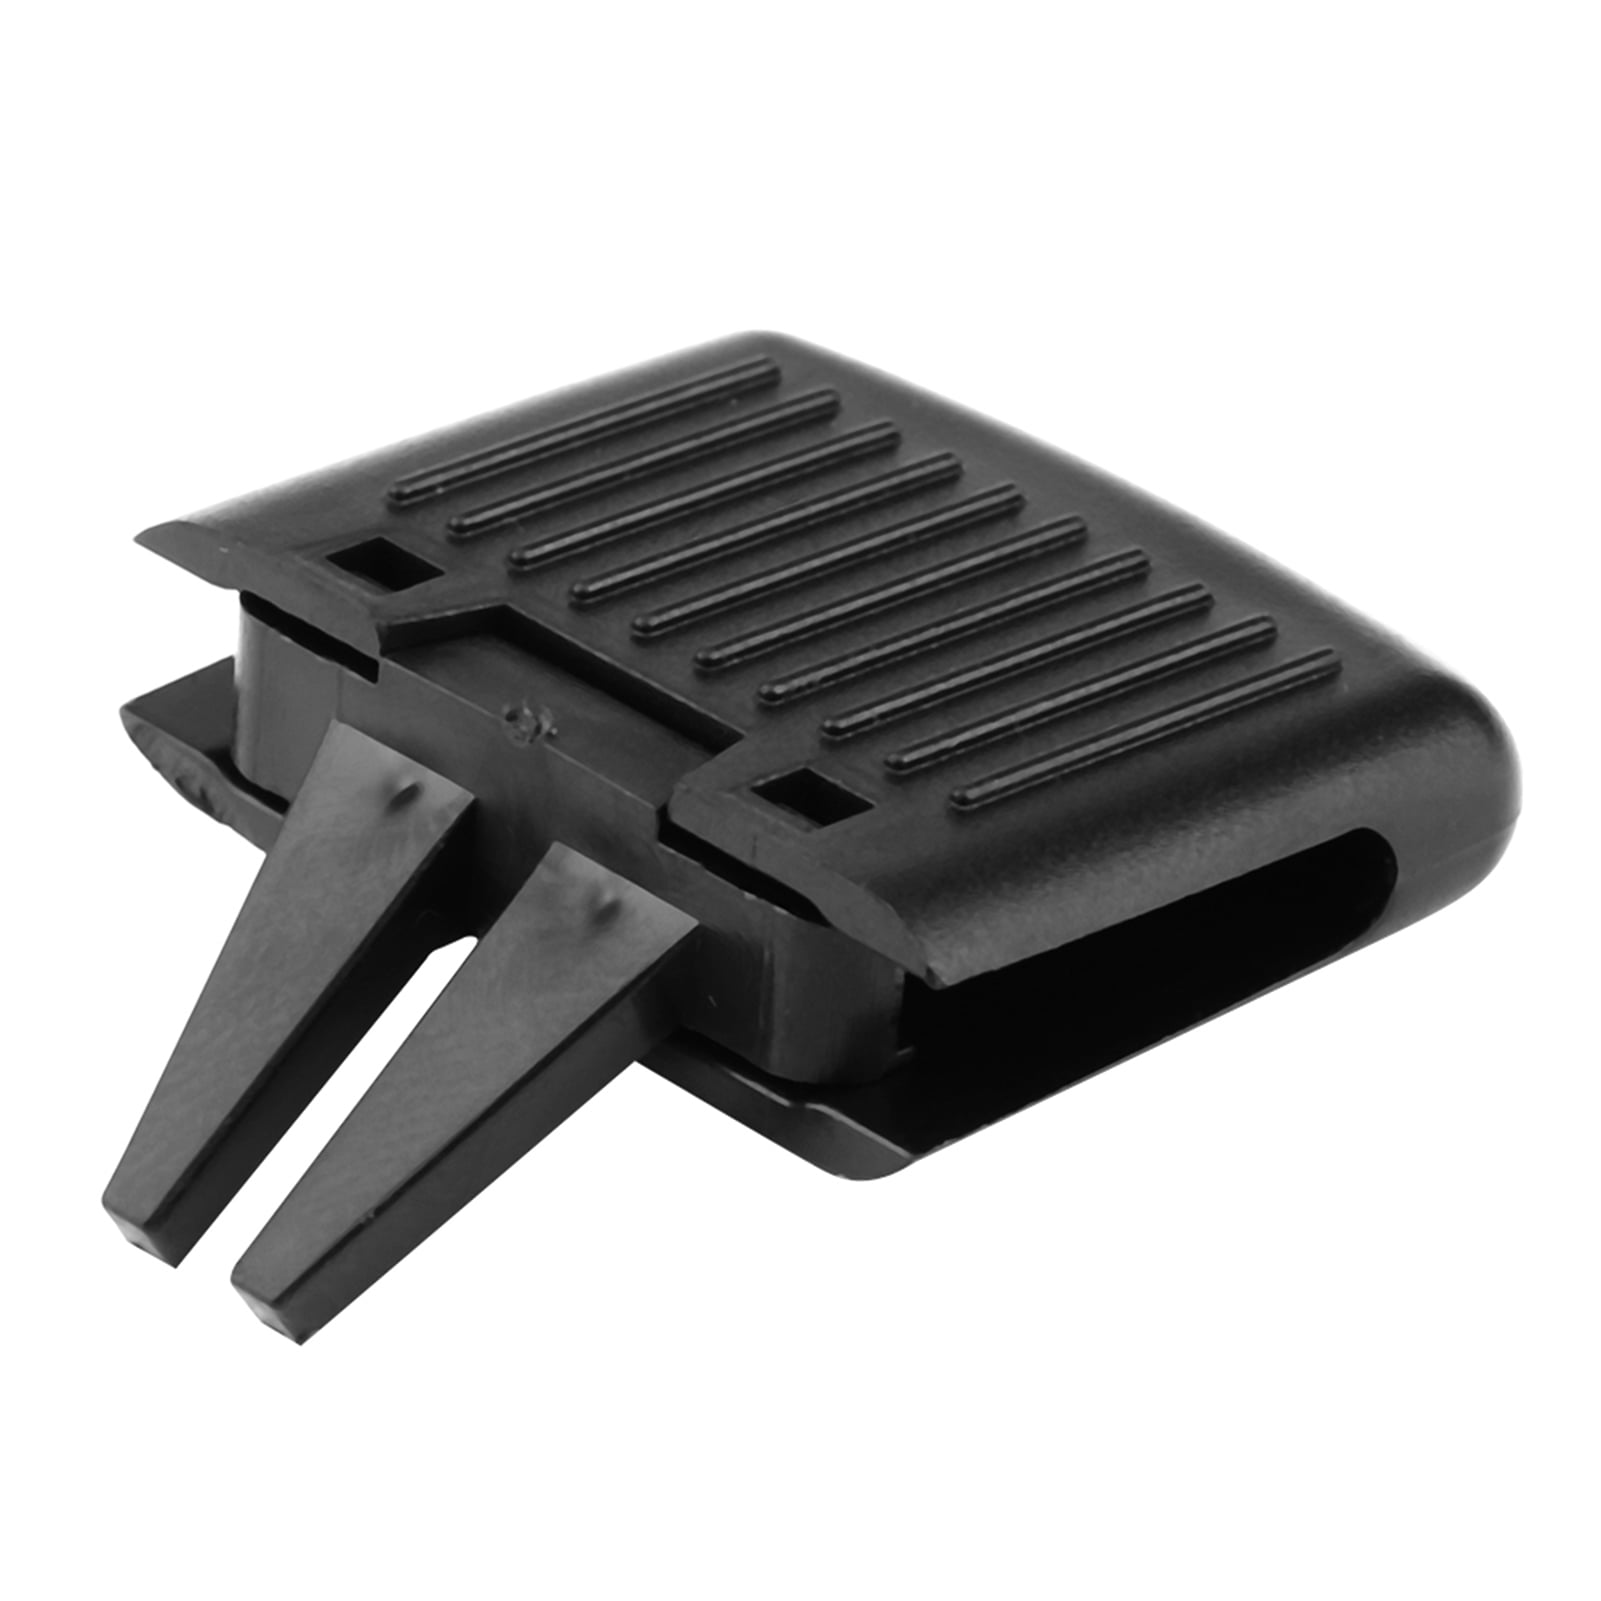 Festnight Fresh Air Grille Clip Air Conditioning Vent Outlet Tab Clip